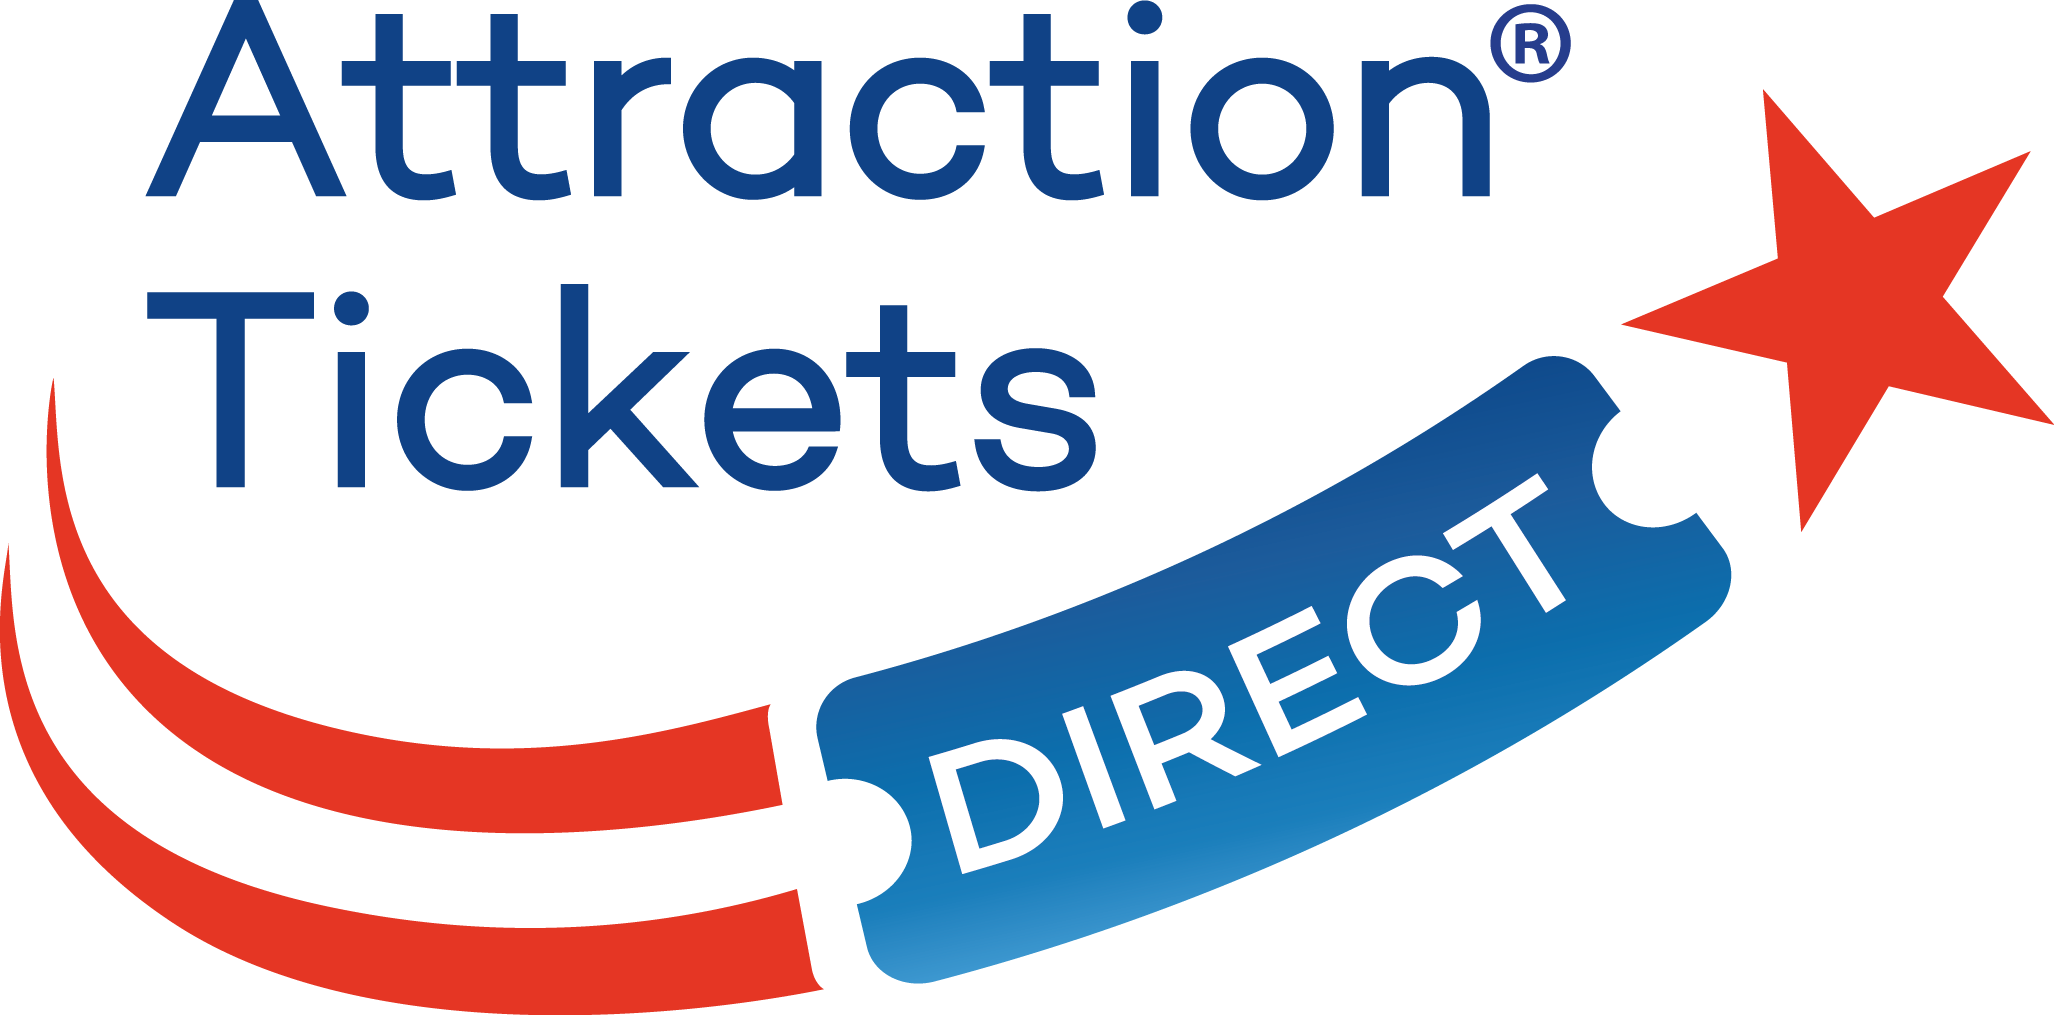 attraction tickets direct